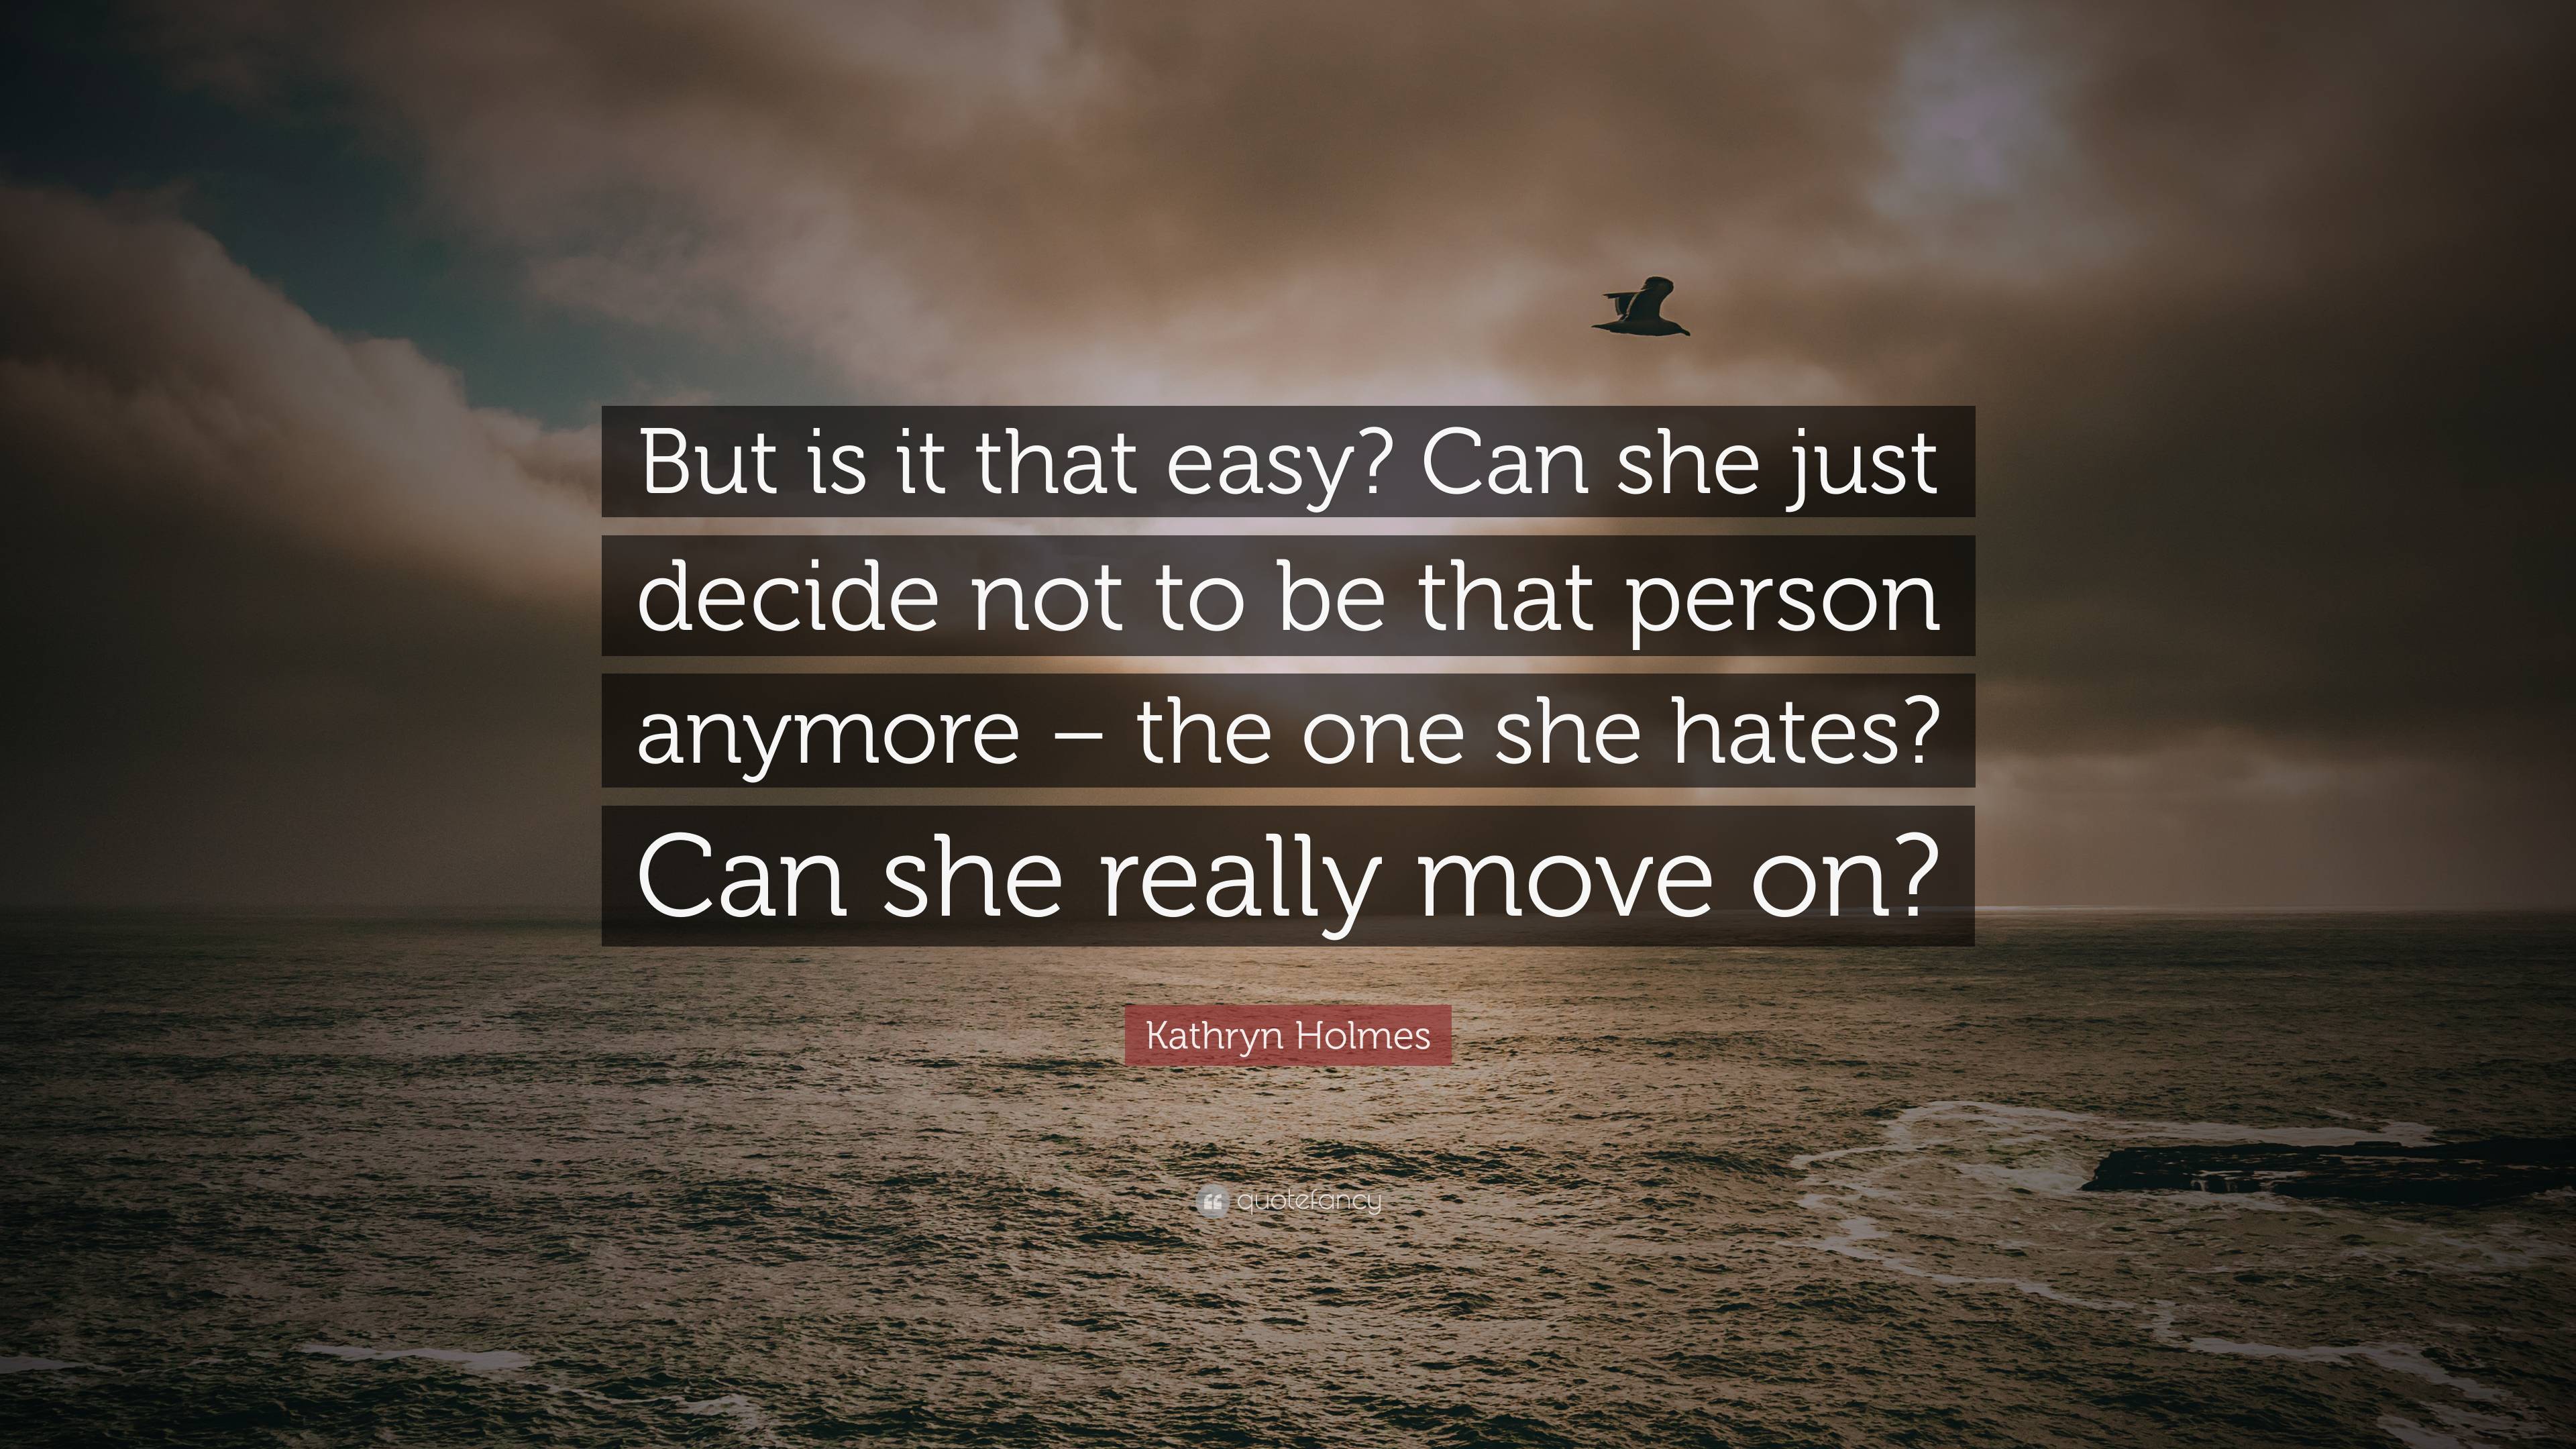 Kathryn Holmes Quote: “But is it that easy? Can she just decide not to ...